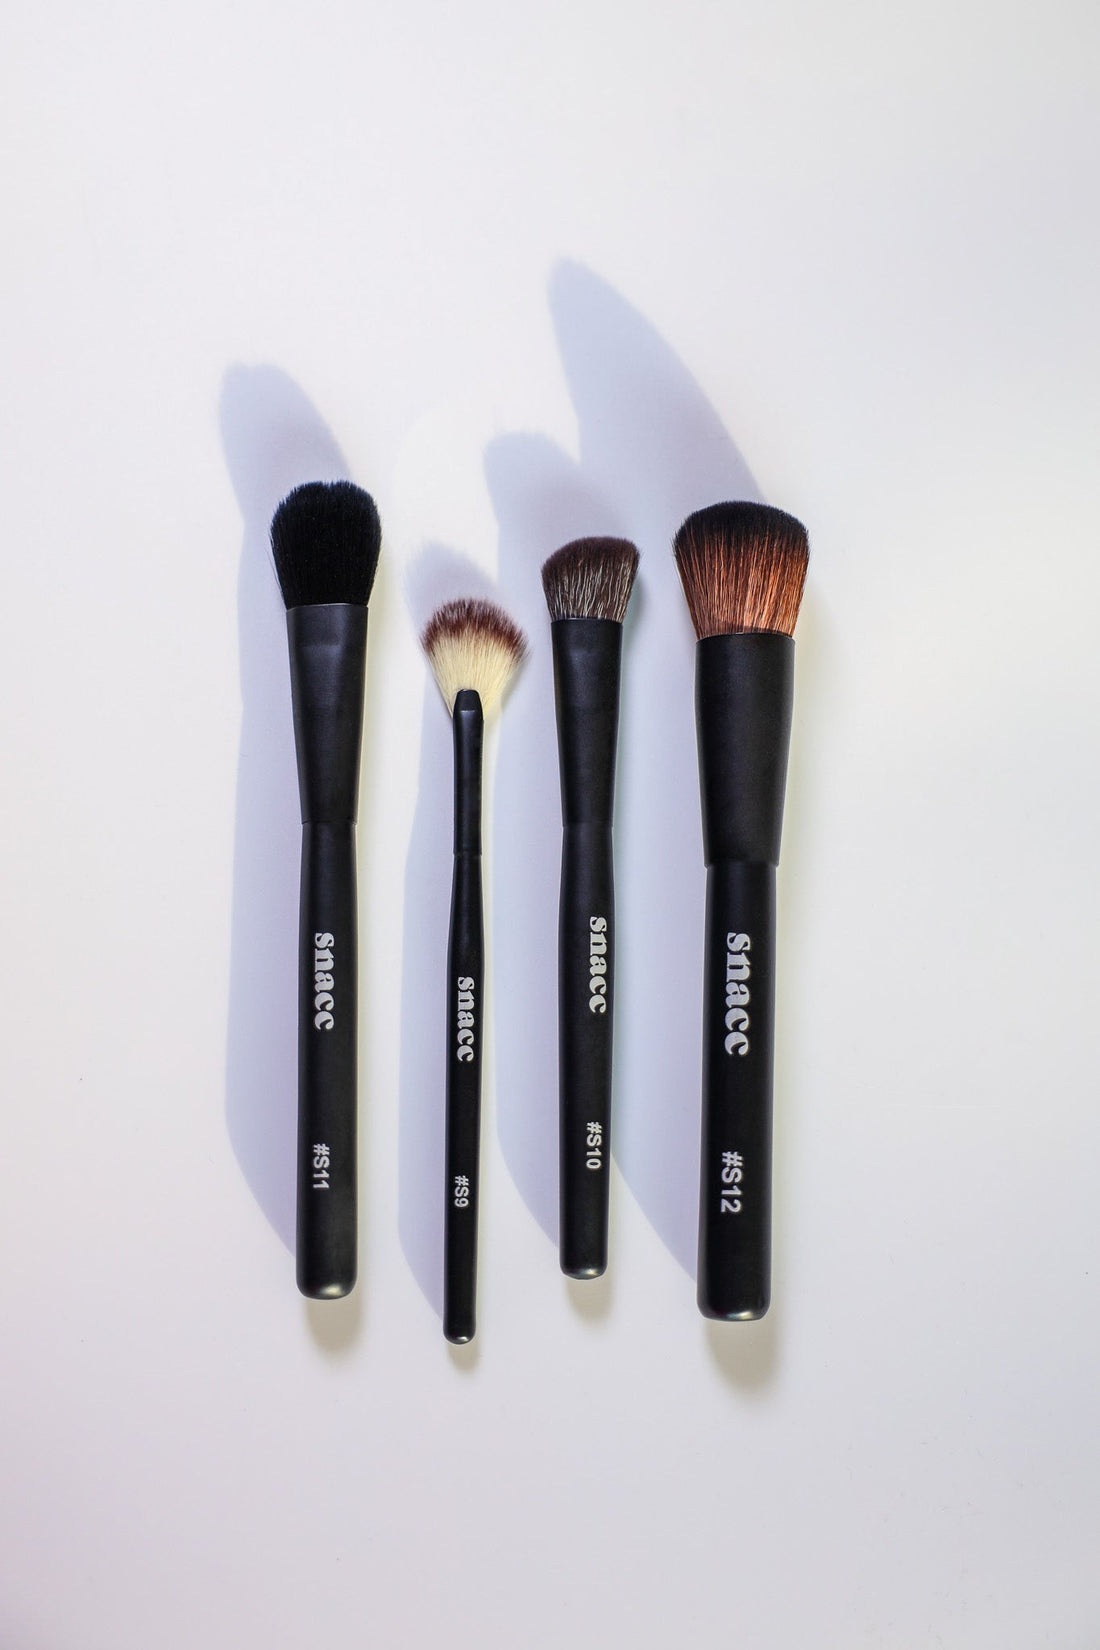 MIDNIGHT SNACC FACE MAKEUP BRUSHES - SET OF 4 - snacc cosmetics®